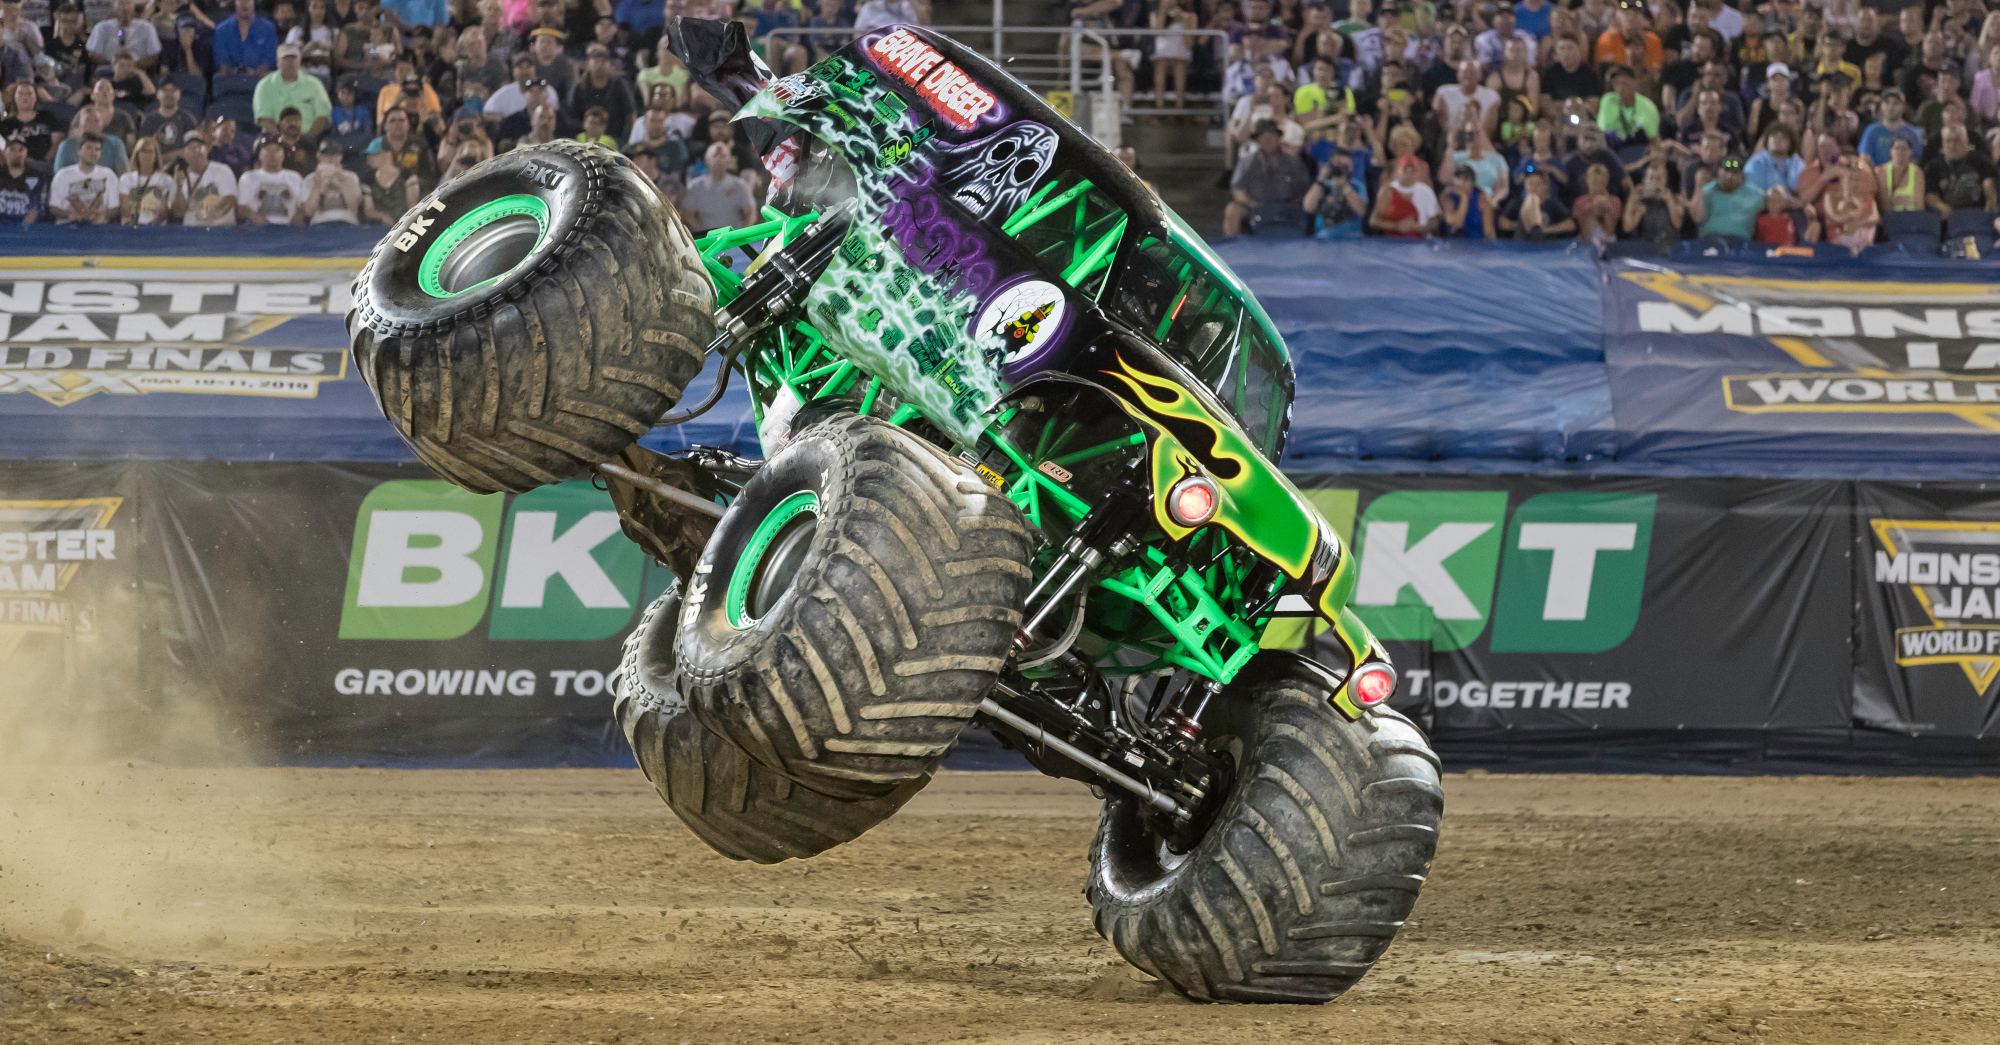 Grave Digger with BKT sponsors in the background